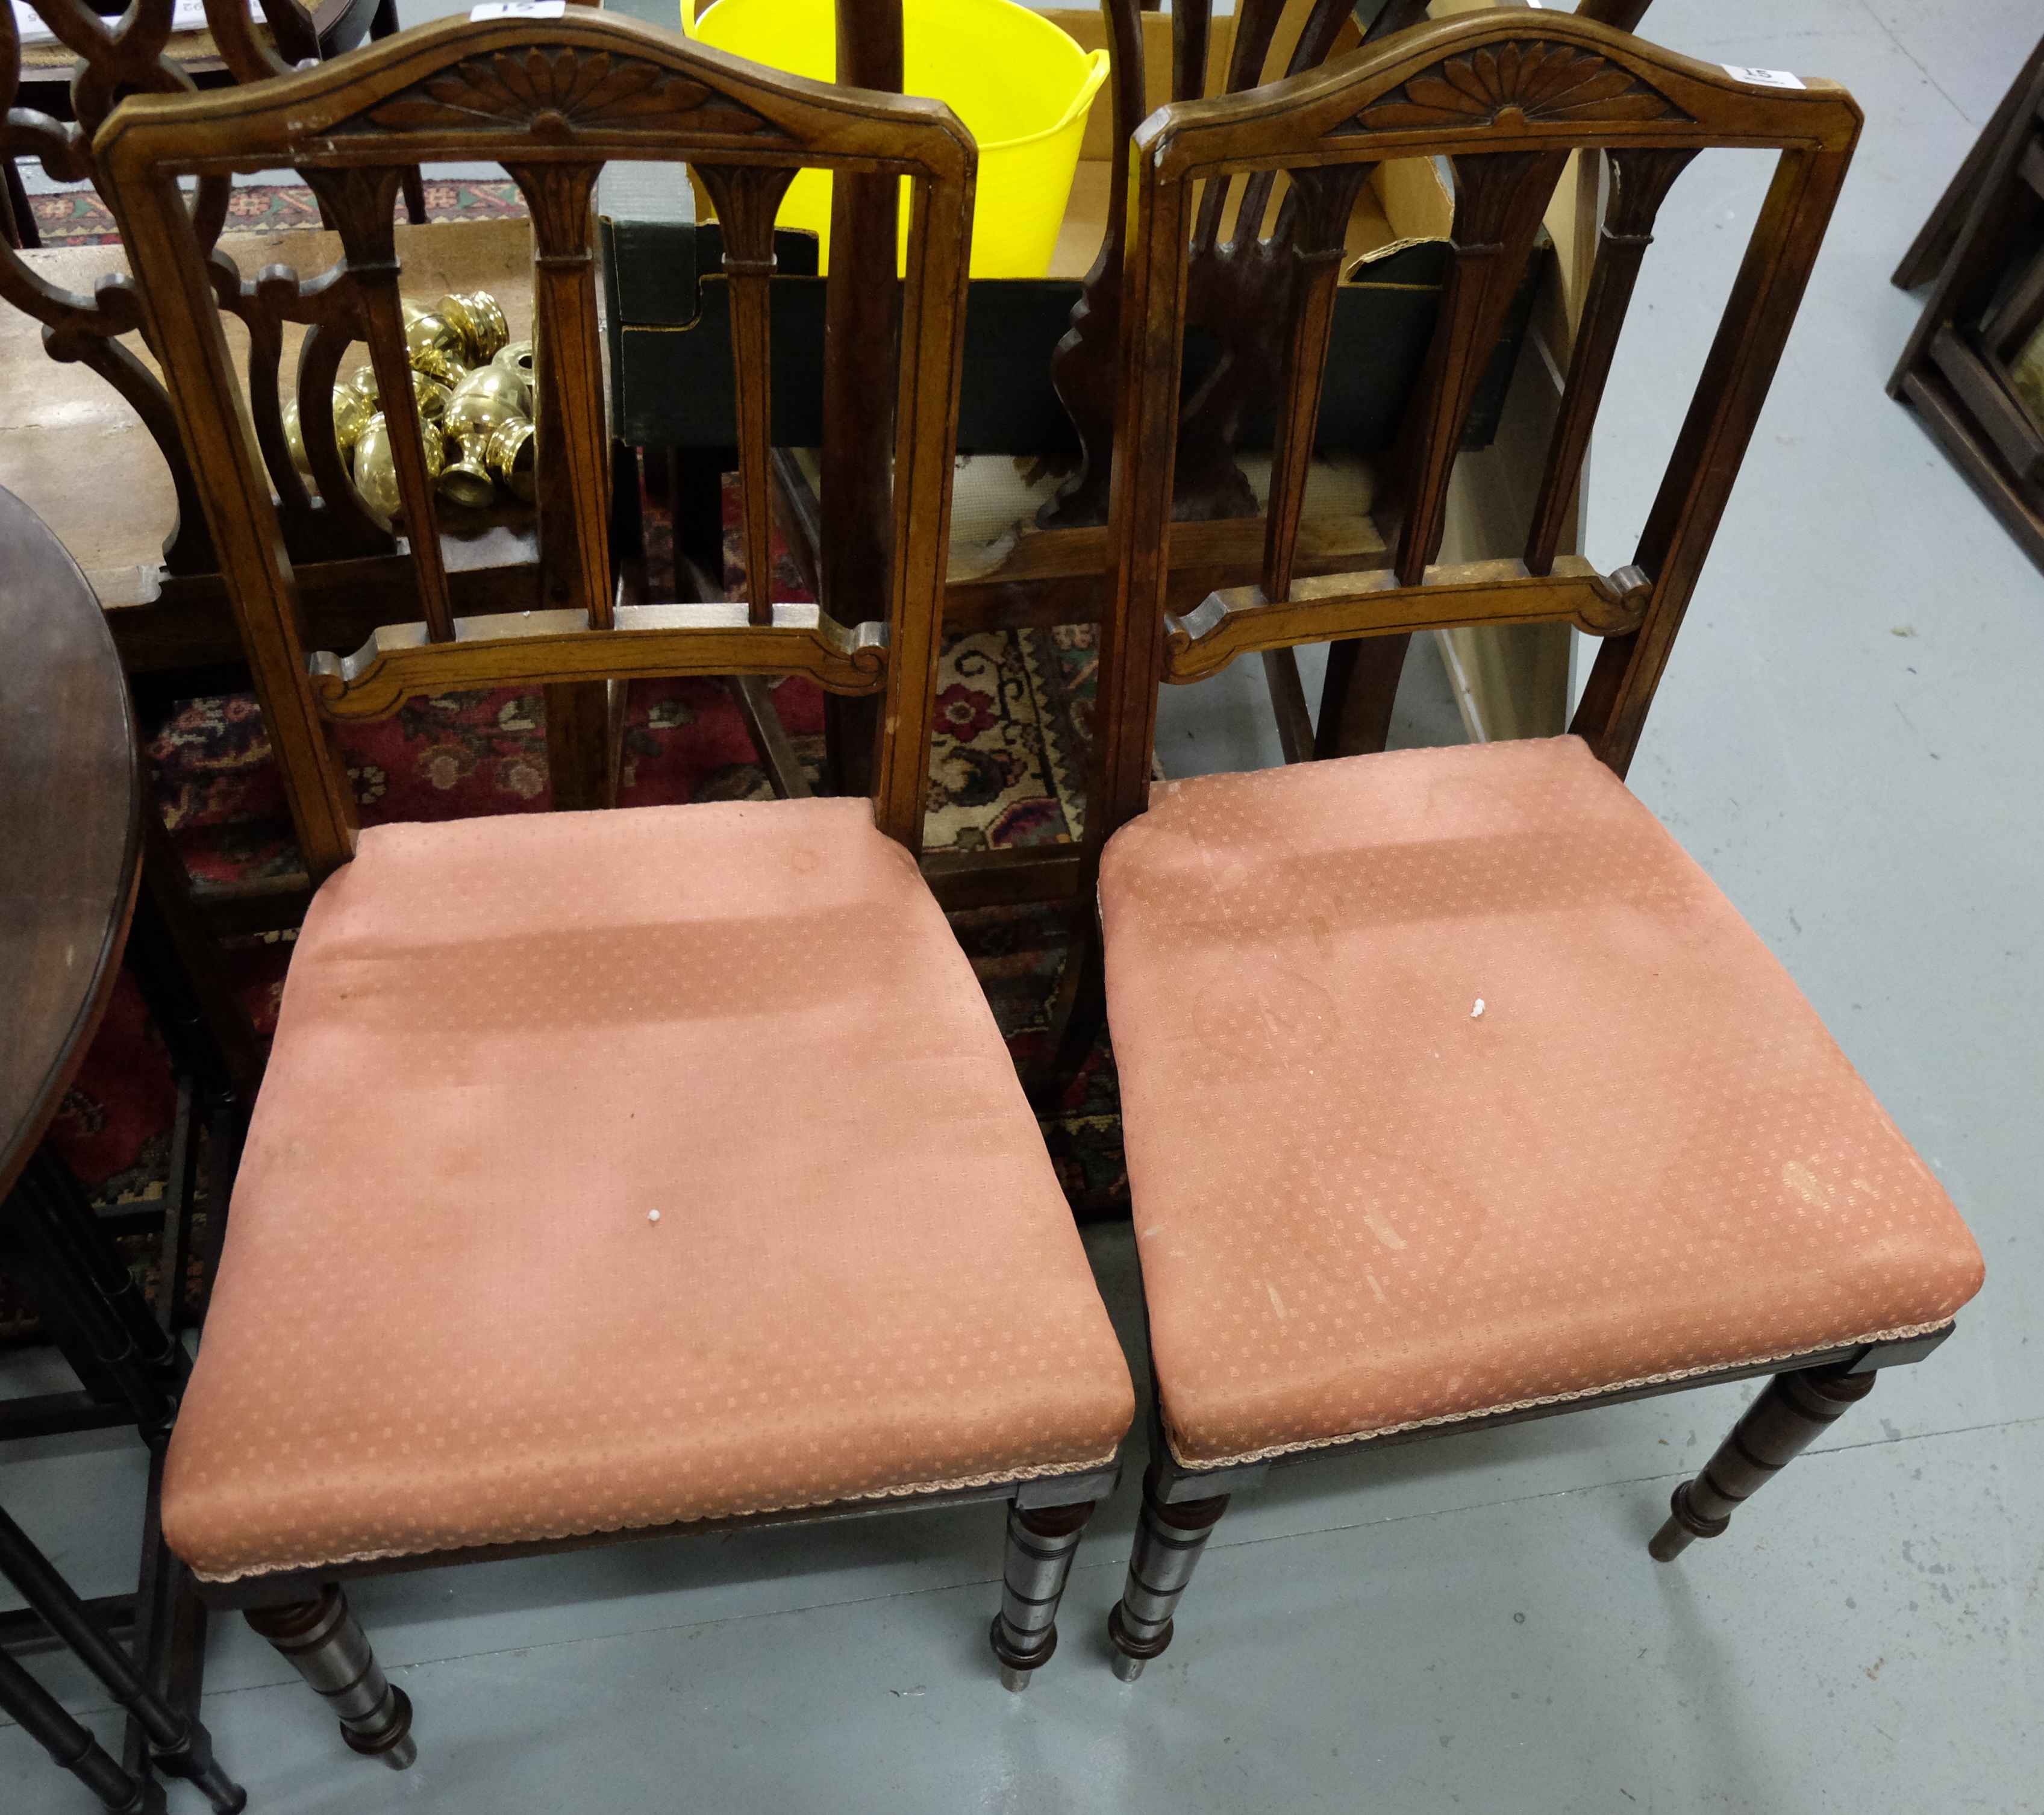 Matching Pair of walnut Side Chairs, mauve patterned fabric, turned front legs. - Image 3 of 3